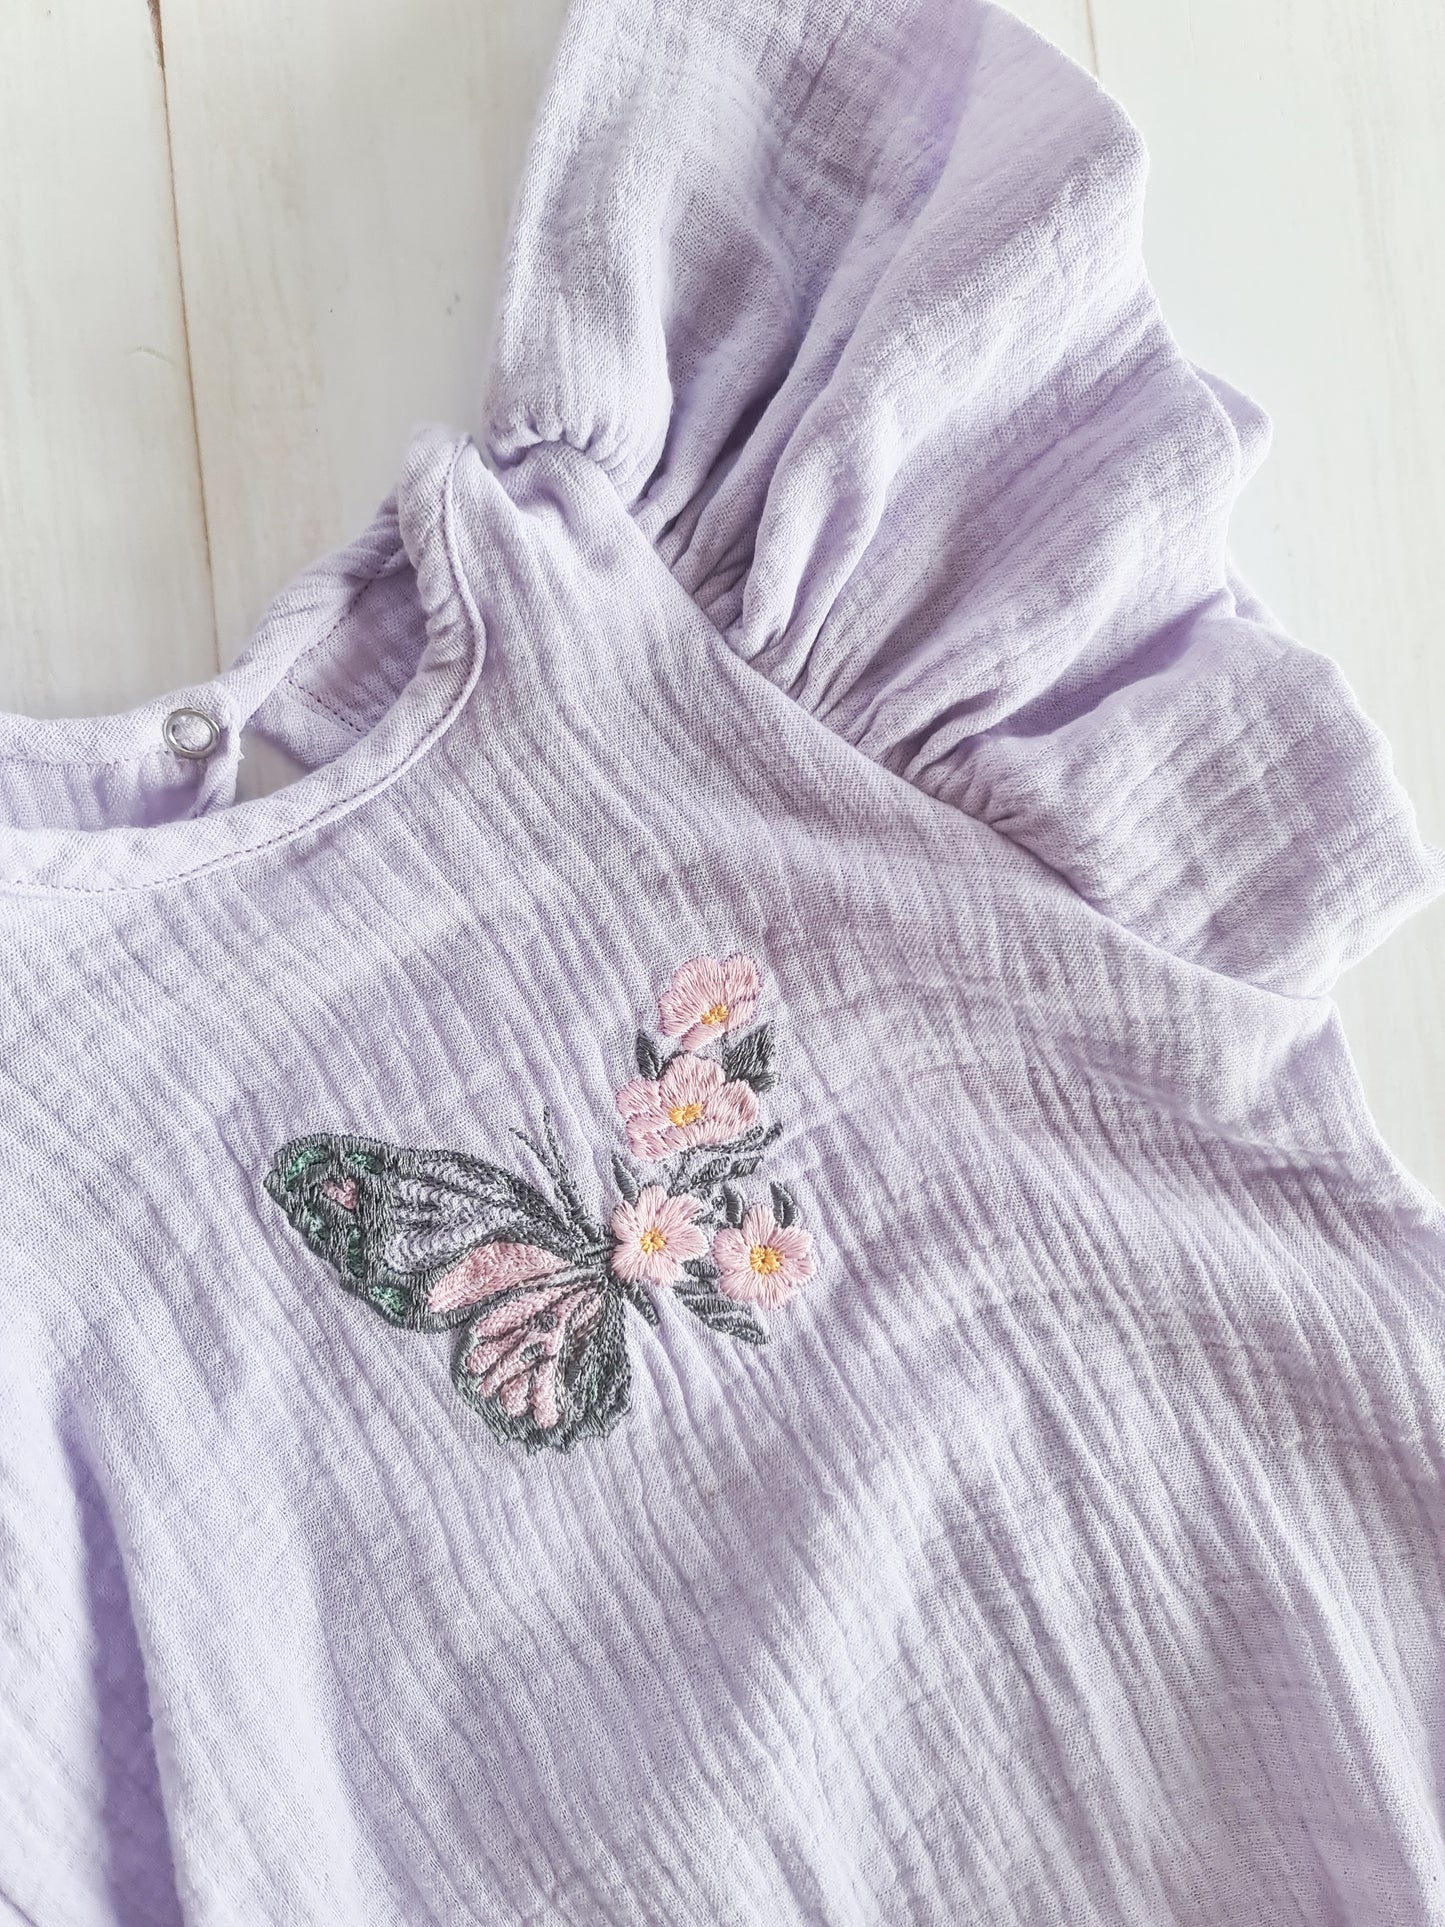 Purple Swan romper with Butterfly Embroidery